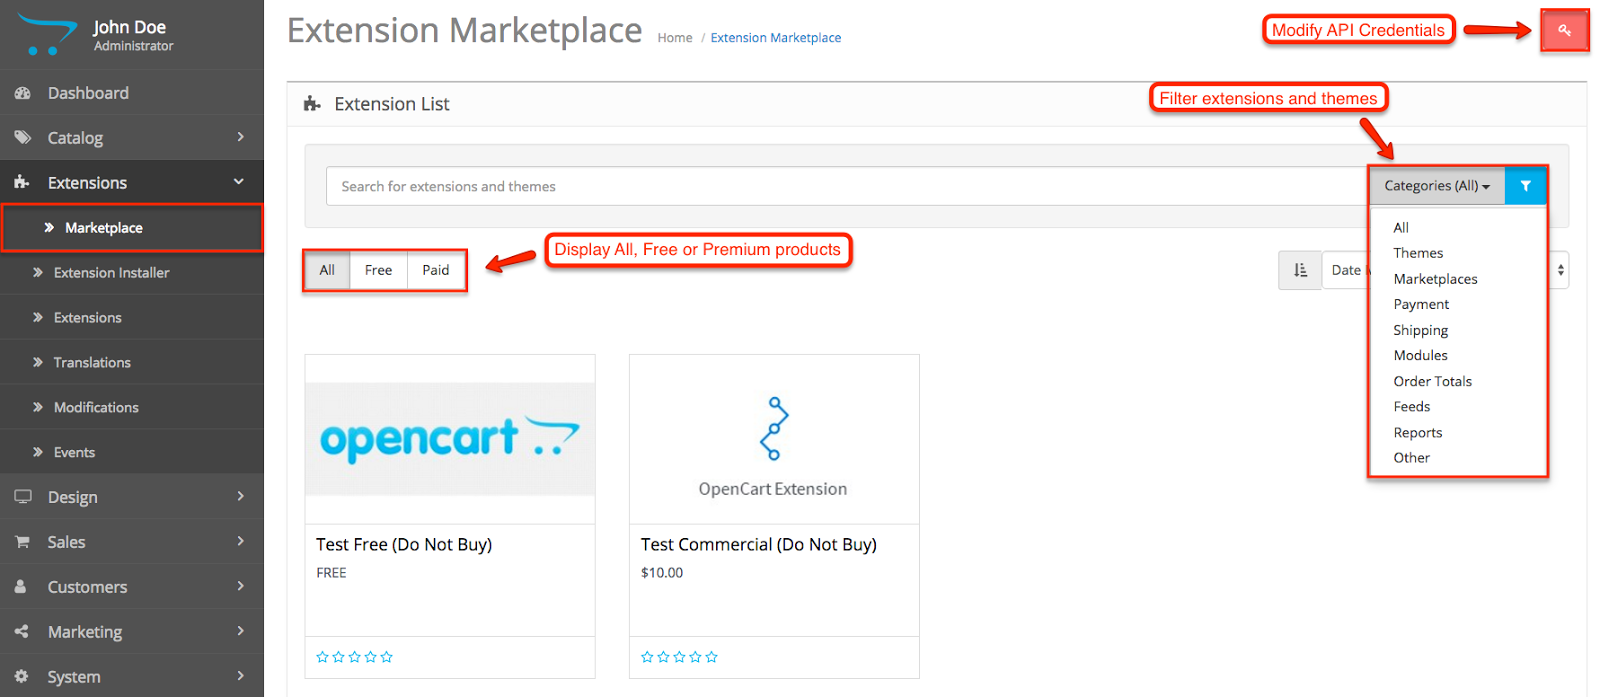 What to Expect in OpenCart 3.0